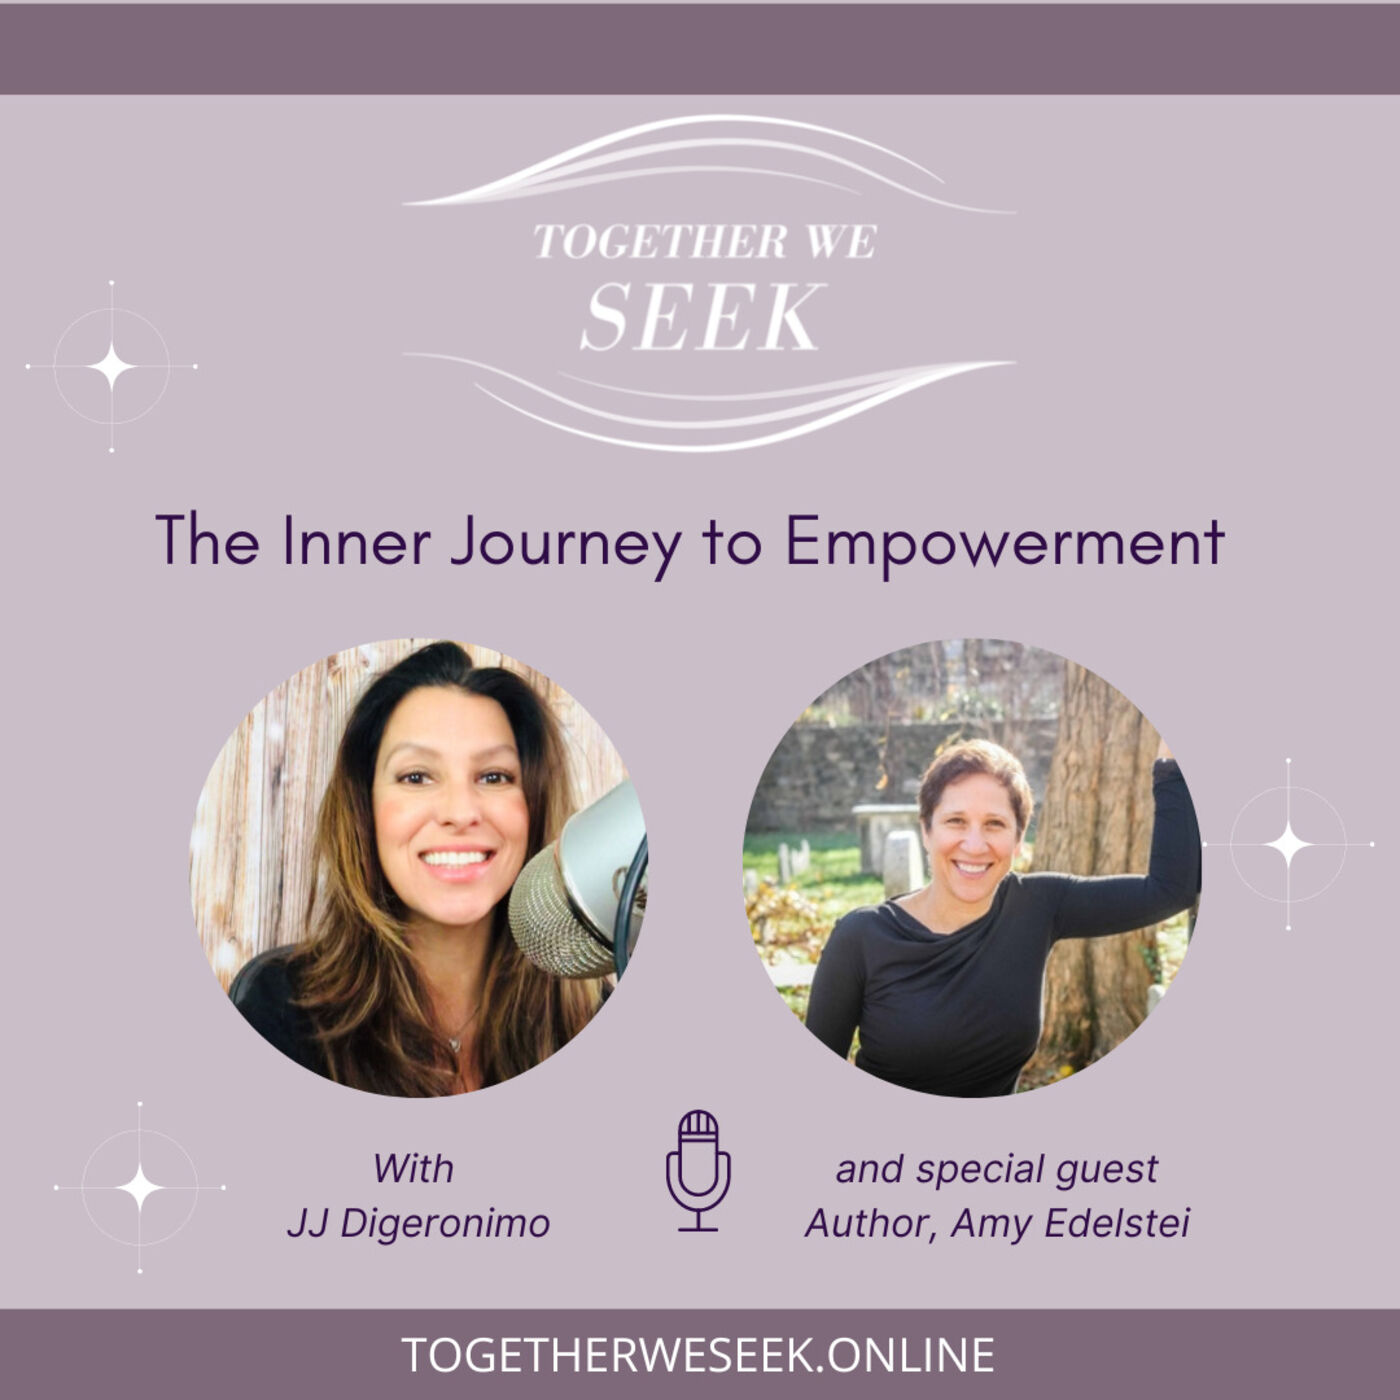 The Inner Journey to Empowerment with Author Amy Edelstein